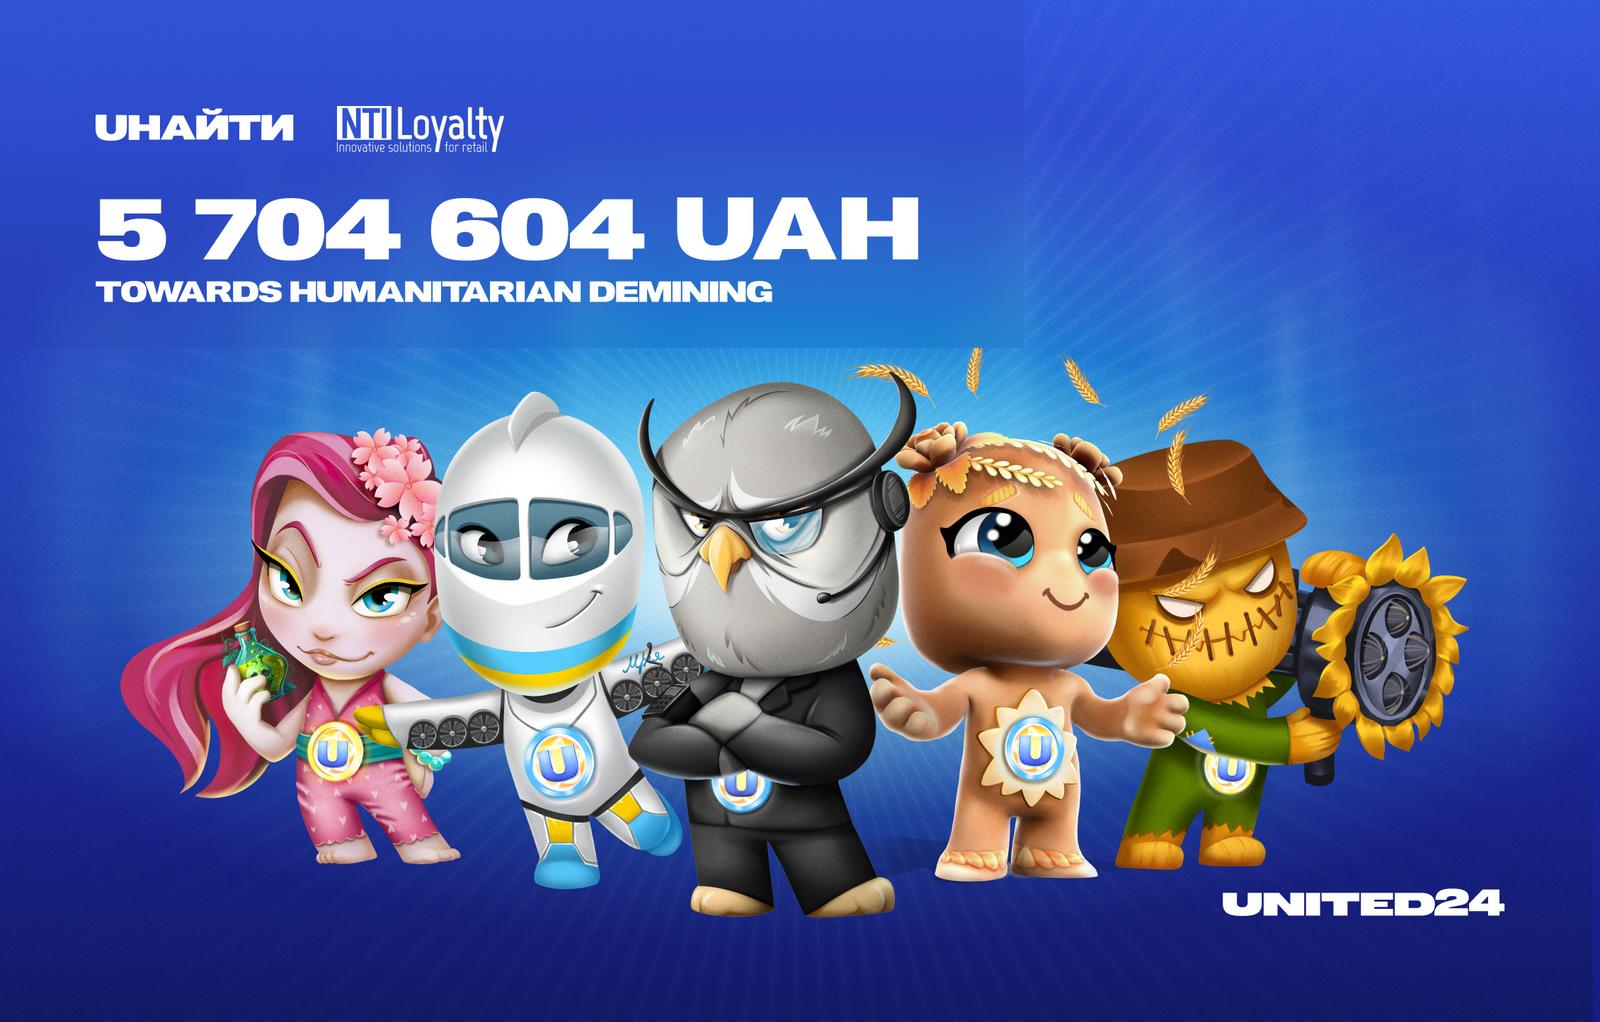 UAH 5,704,604 was raised as part of the Unite charity initiative for humanitarian demining